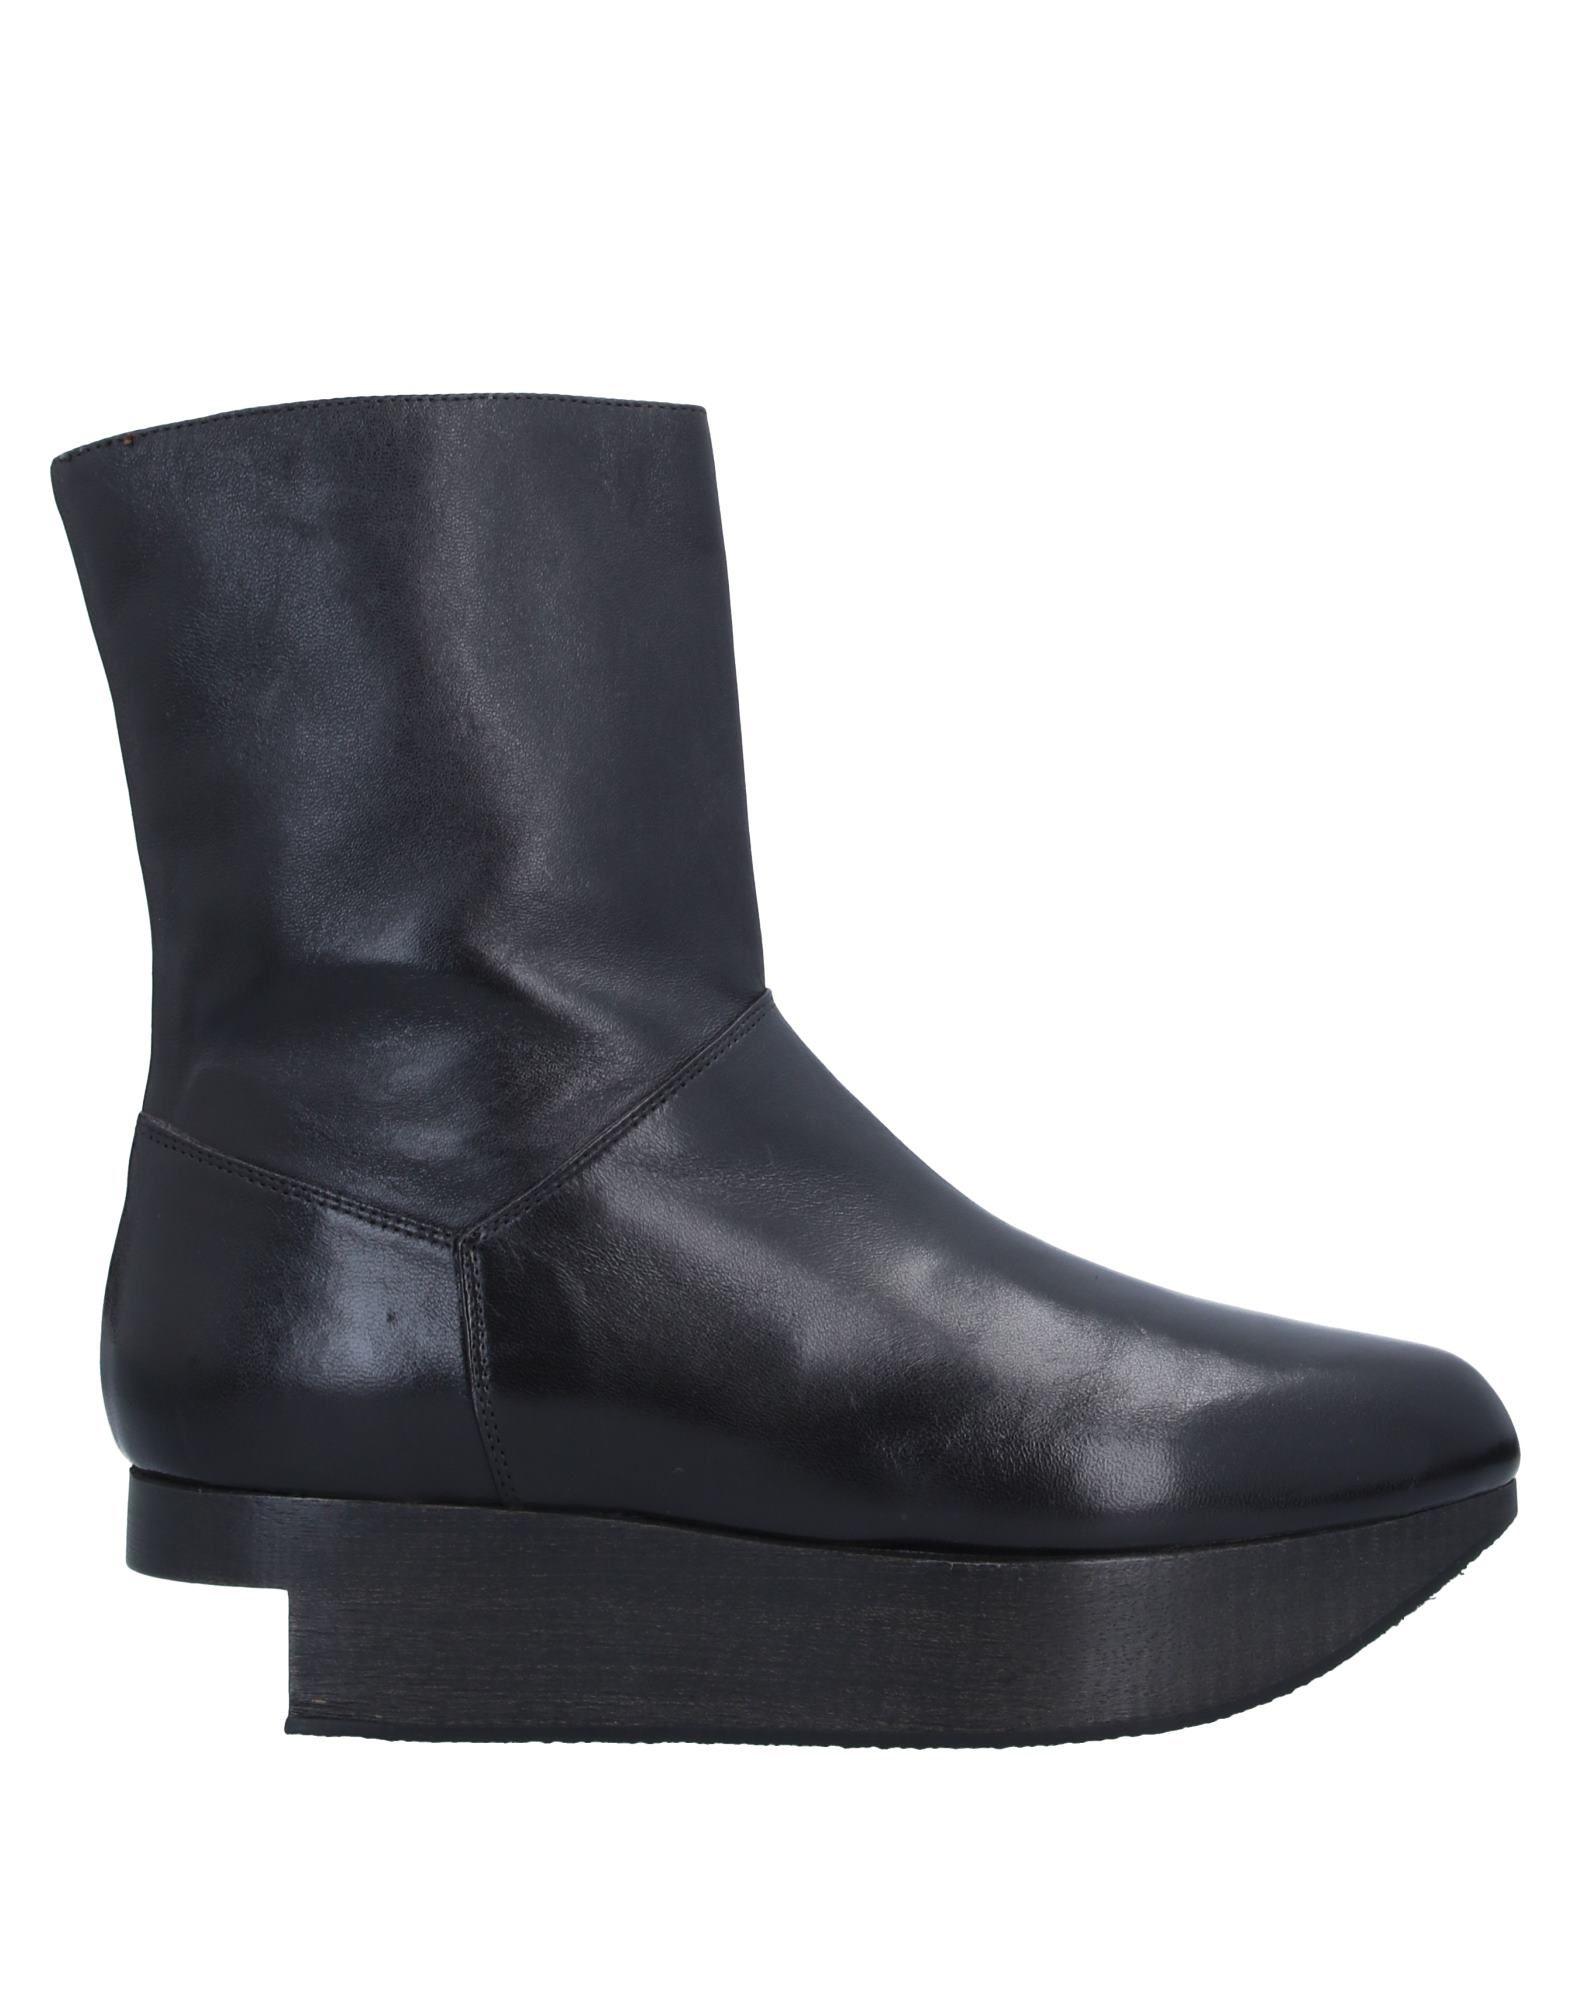 Vivienne Westwood Leather Ankle Boots in Black - Lyst